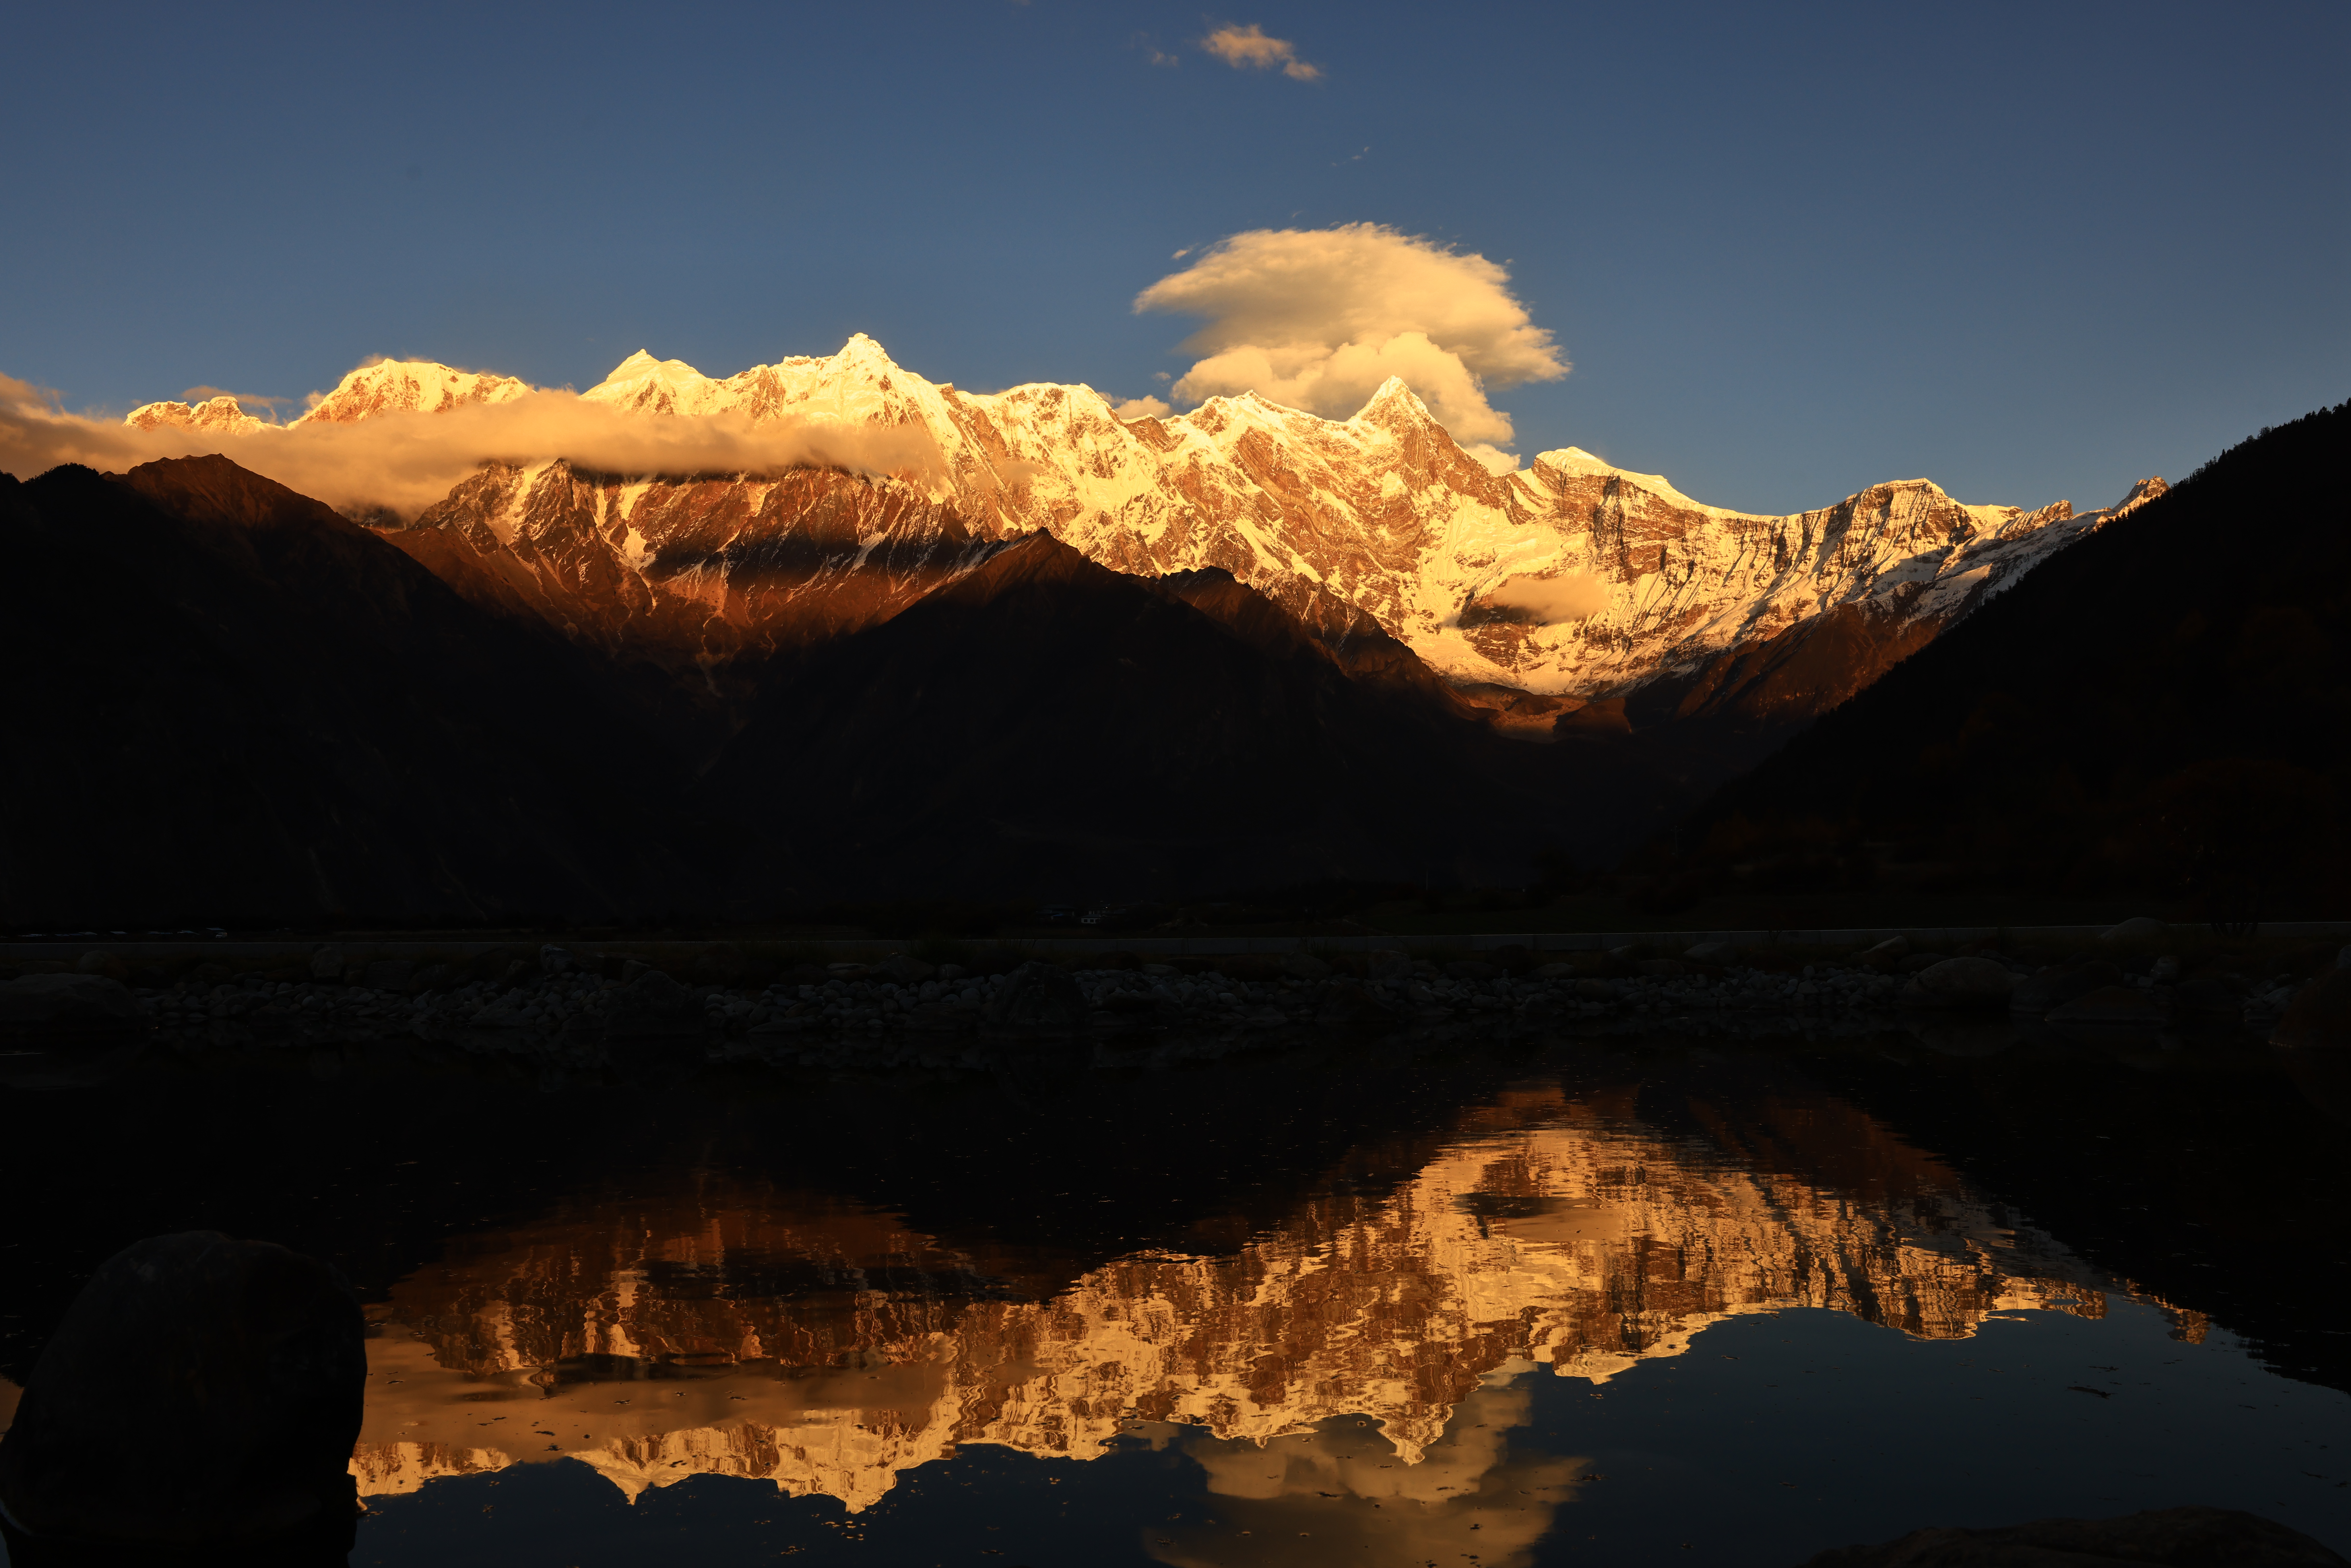 General 8192x5464 clouds mountains snow nature sky water reflection sunlight sunset glow low light